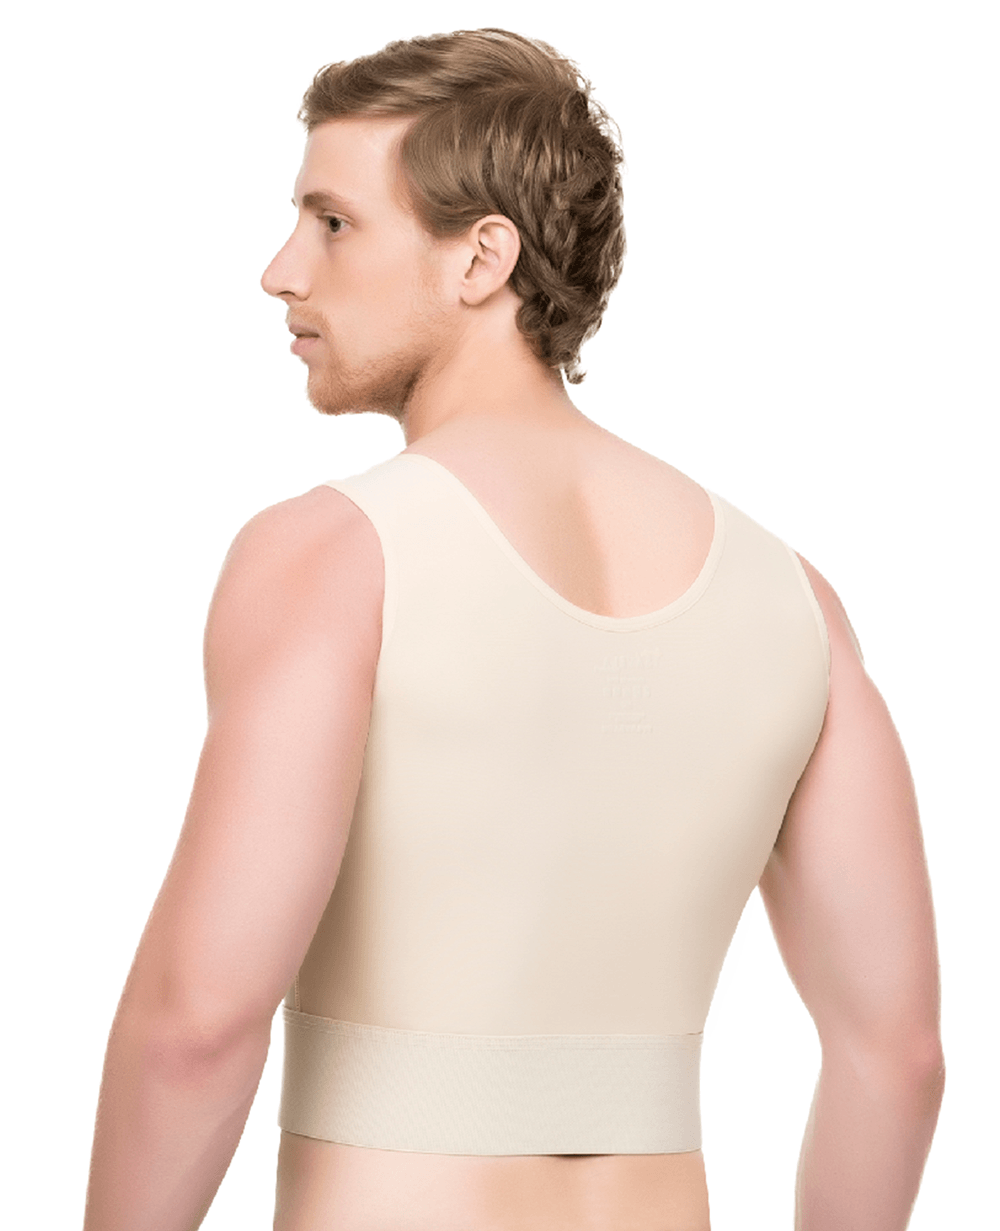 Short Length Male Abdominal Cosmetic Surgery Compression Vest with Zipper (MG03-SH) - Isavela Compression Garments